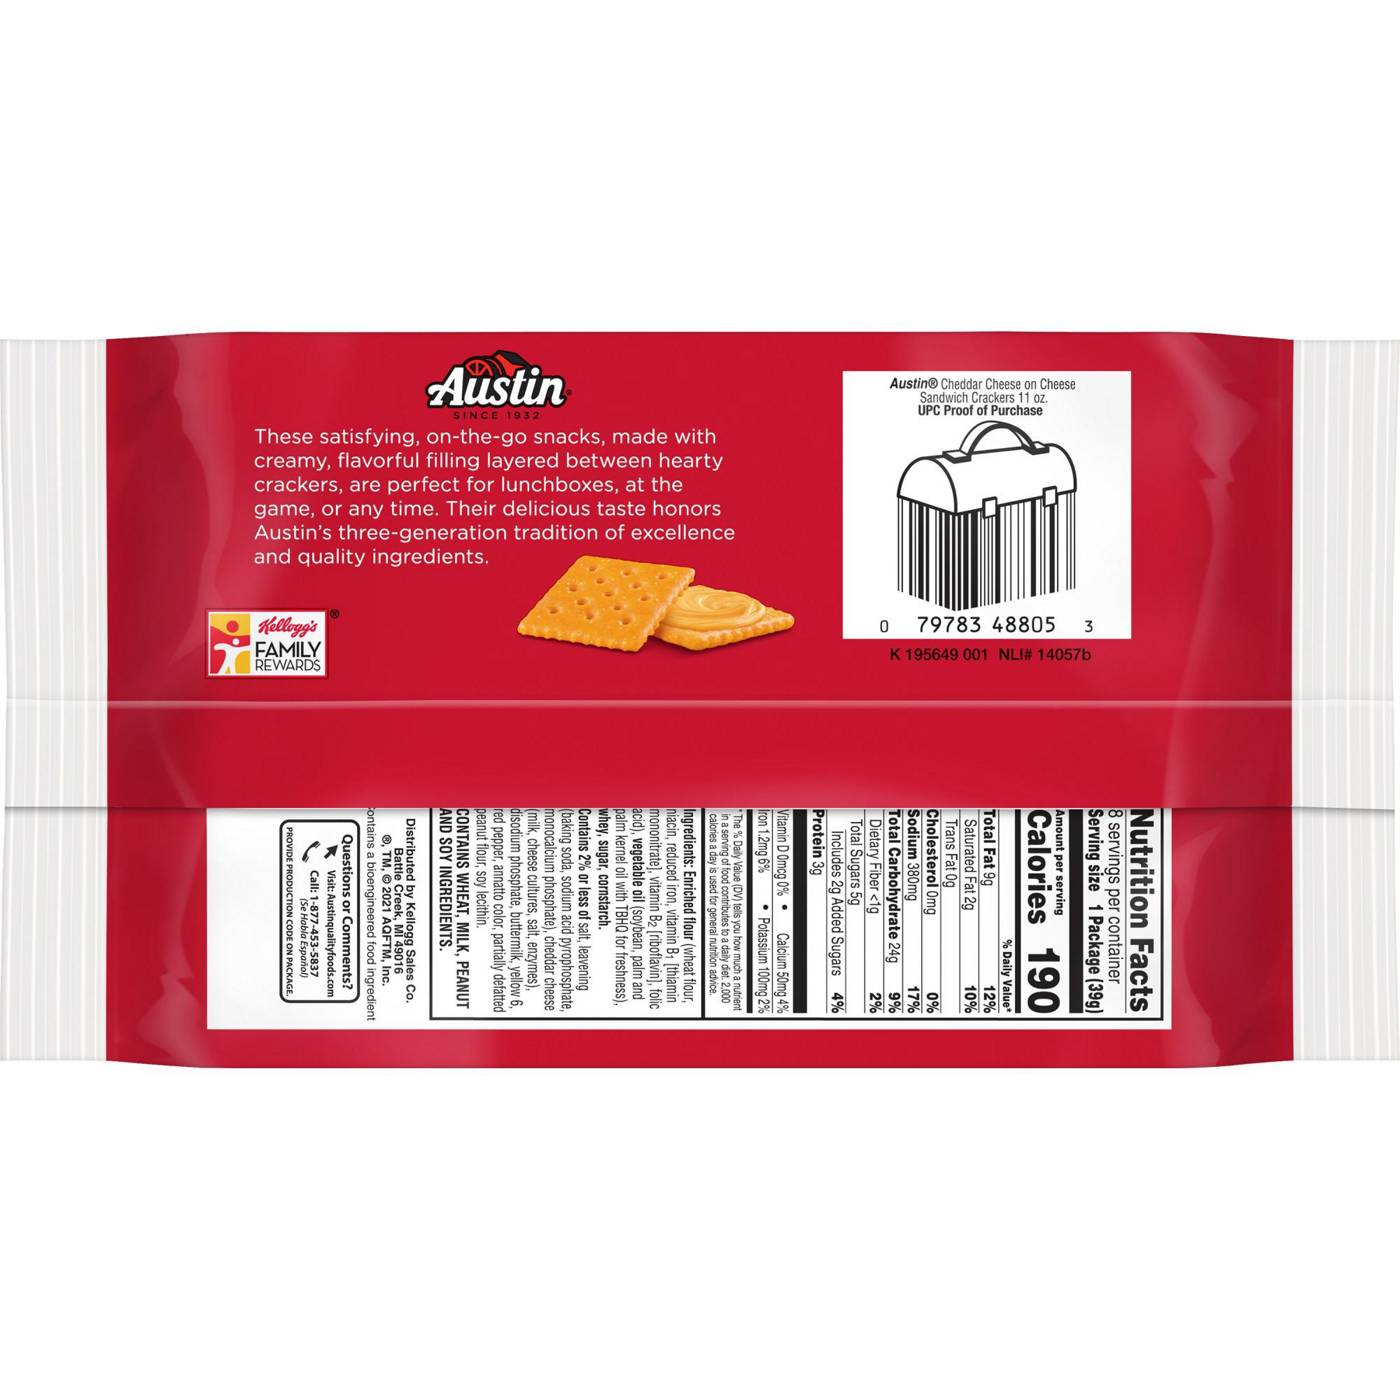 Austin Cheddar Cheese on Cheese Sandwich Crackers; image 3 of 4